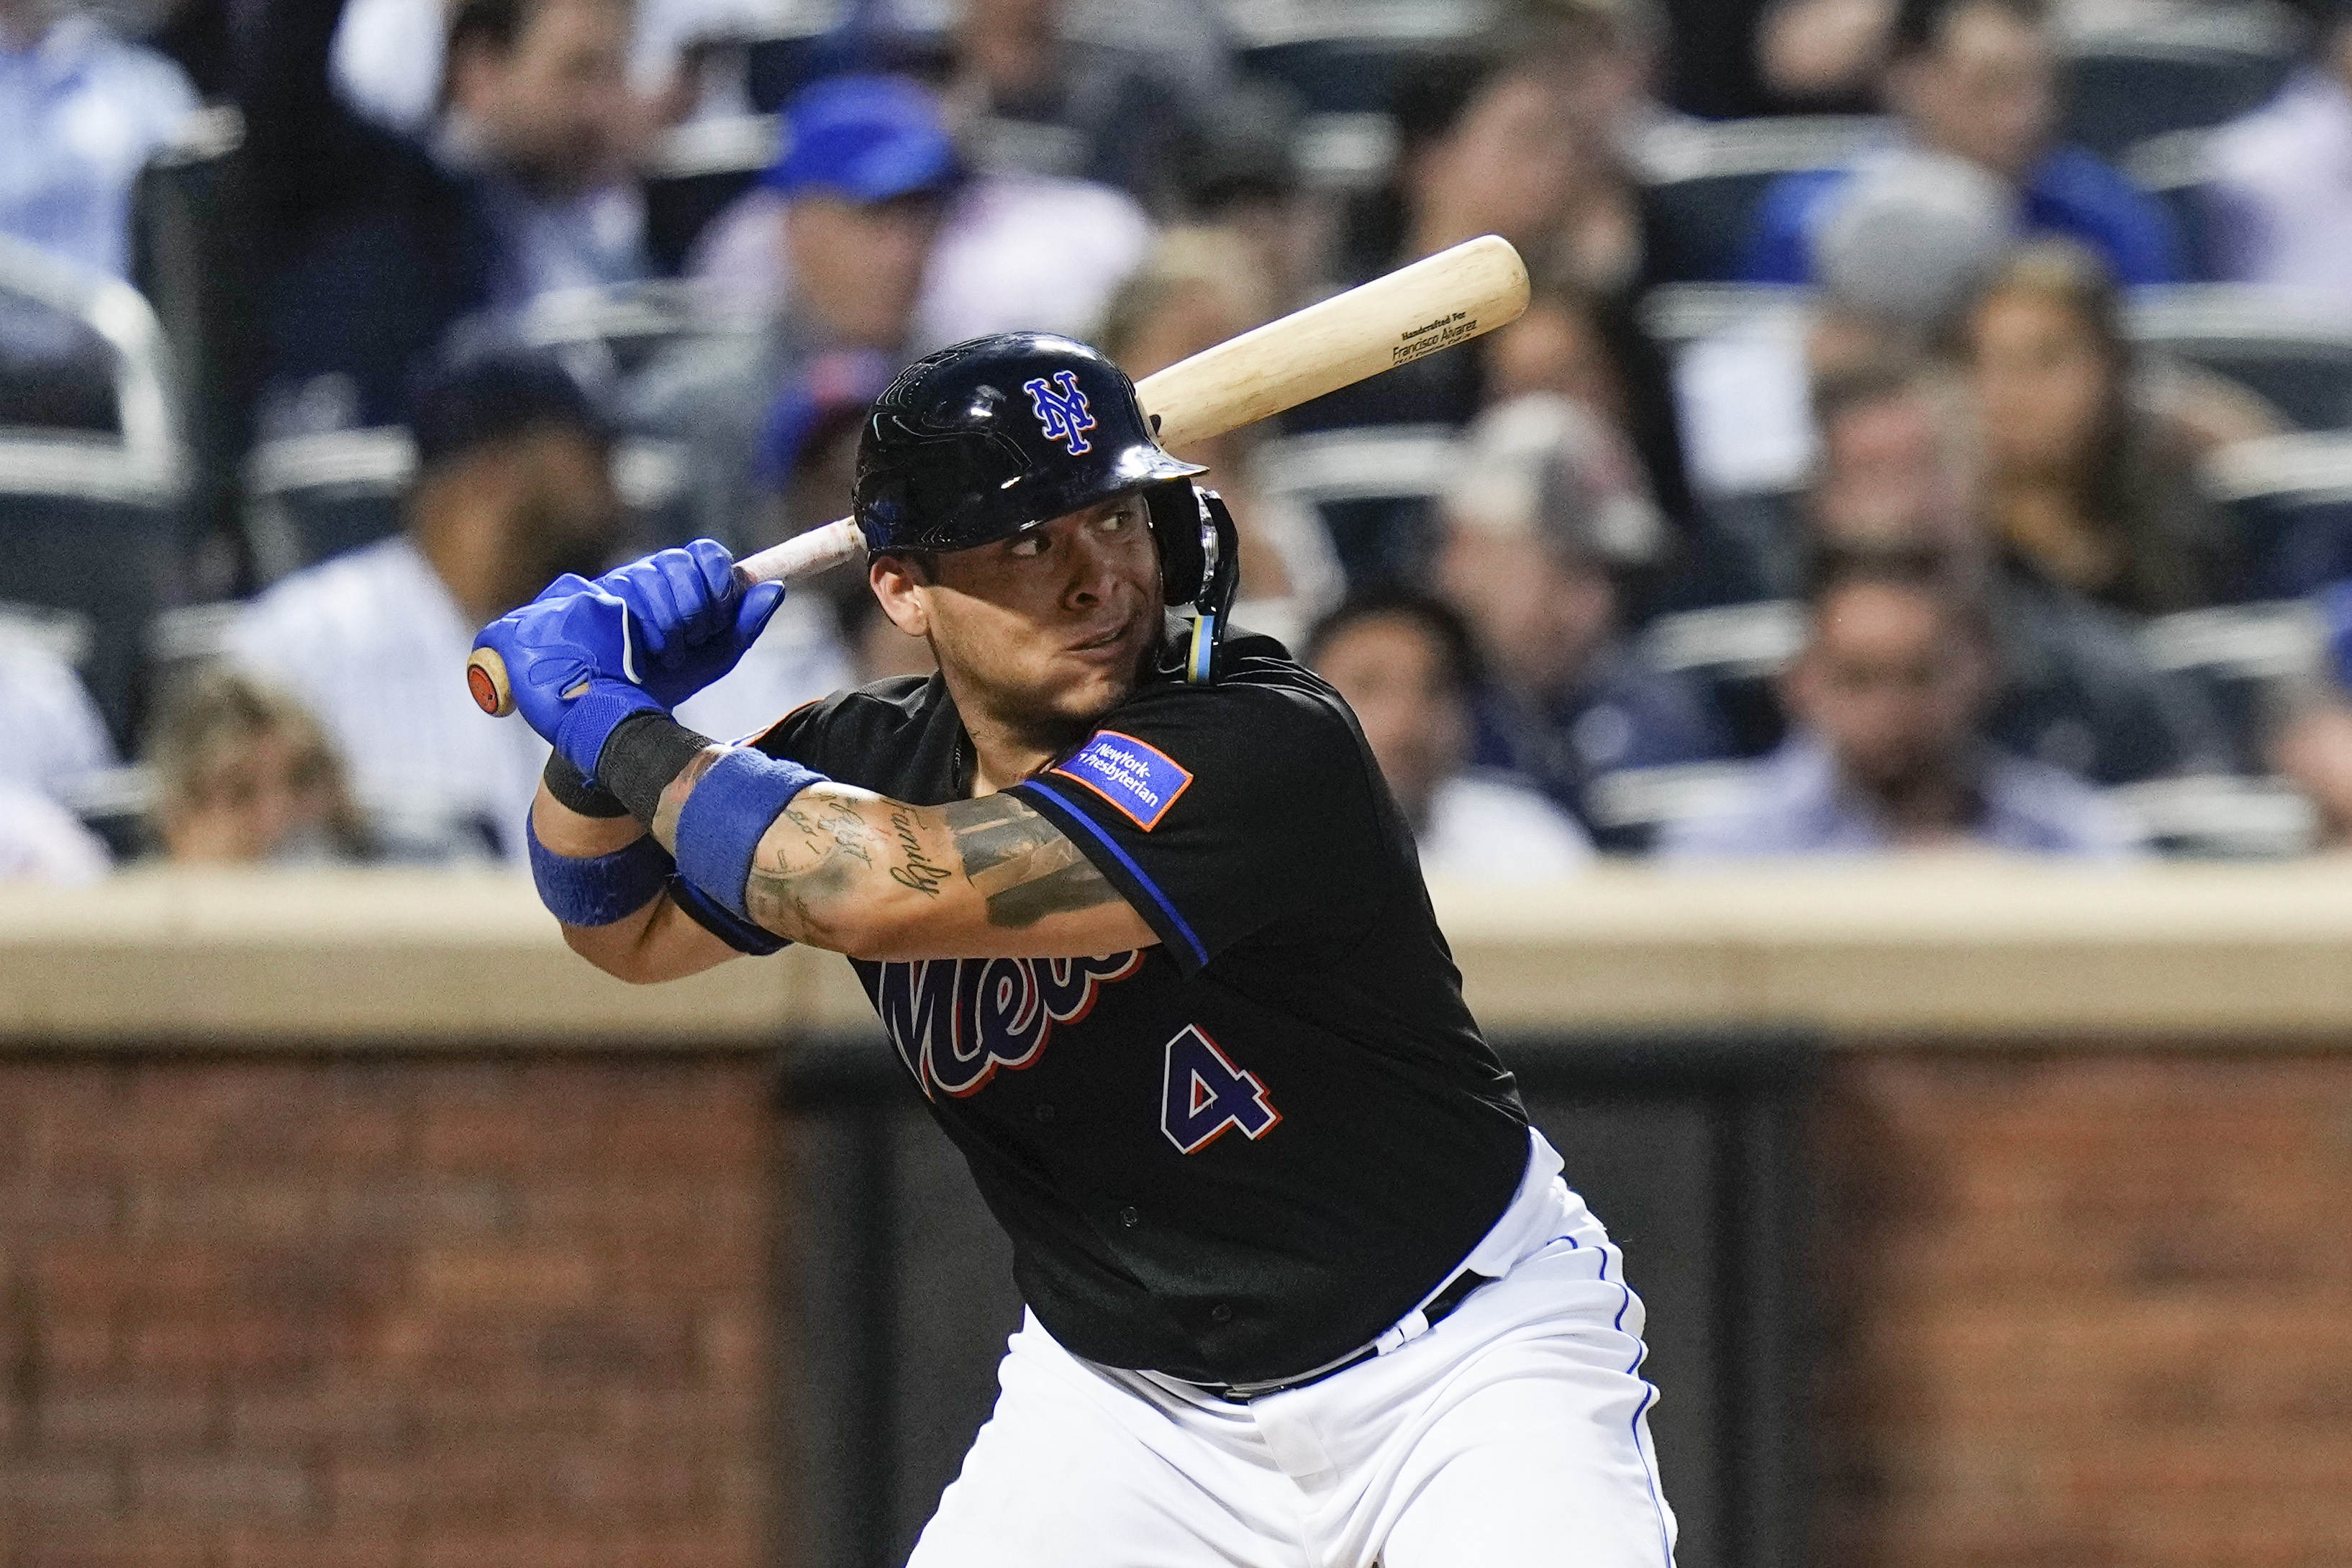 Francisco Alvarez is a rising star for the New York Mets